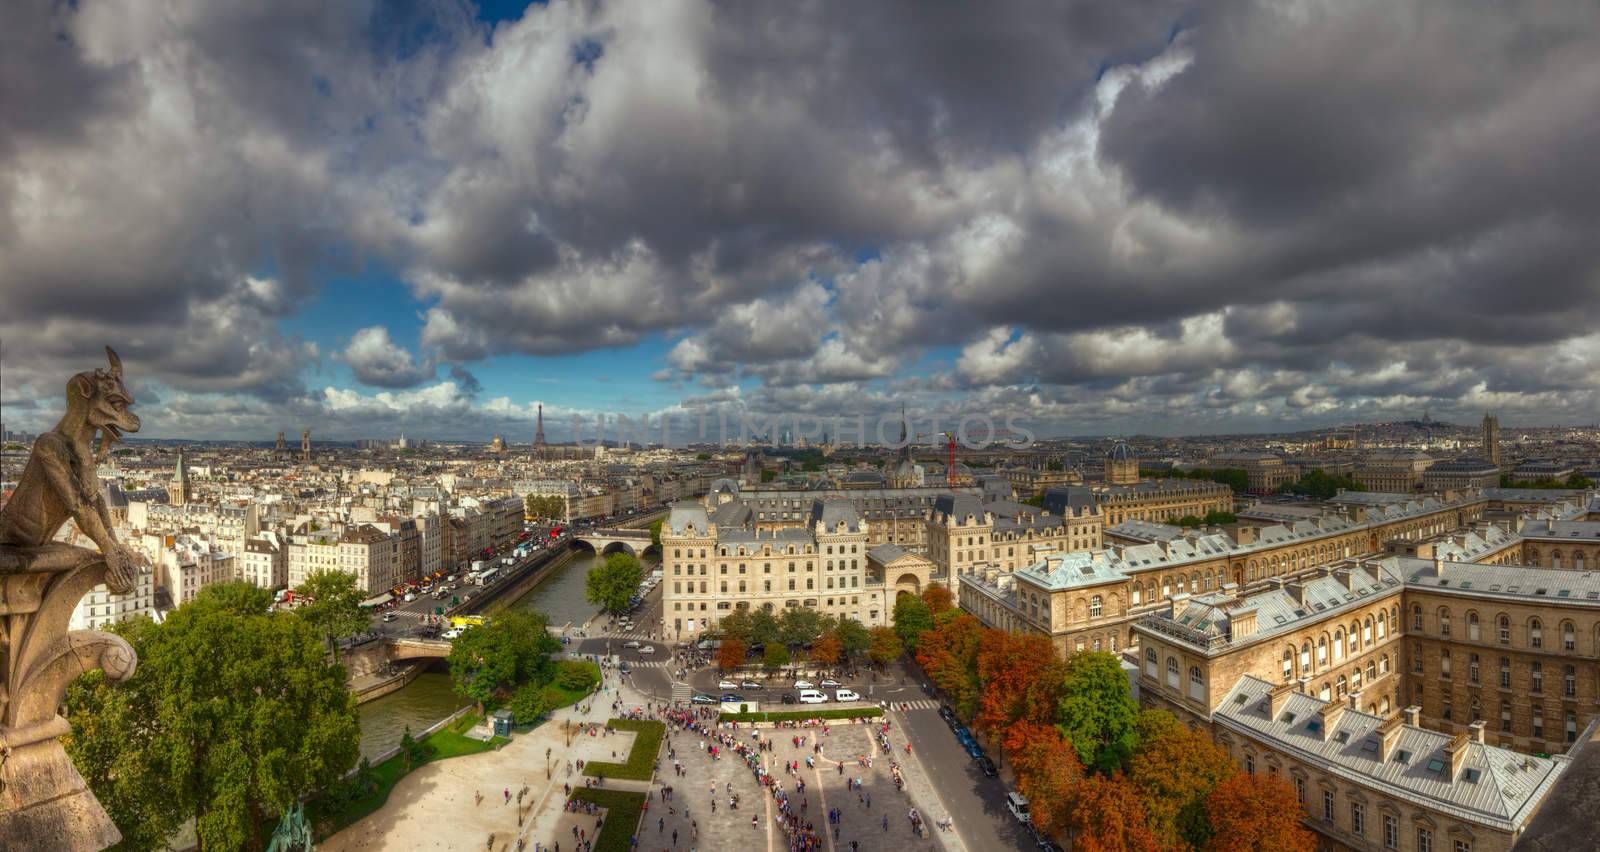 Picturesque view of Paris cityscape from the towers of Notre Dame cathedral